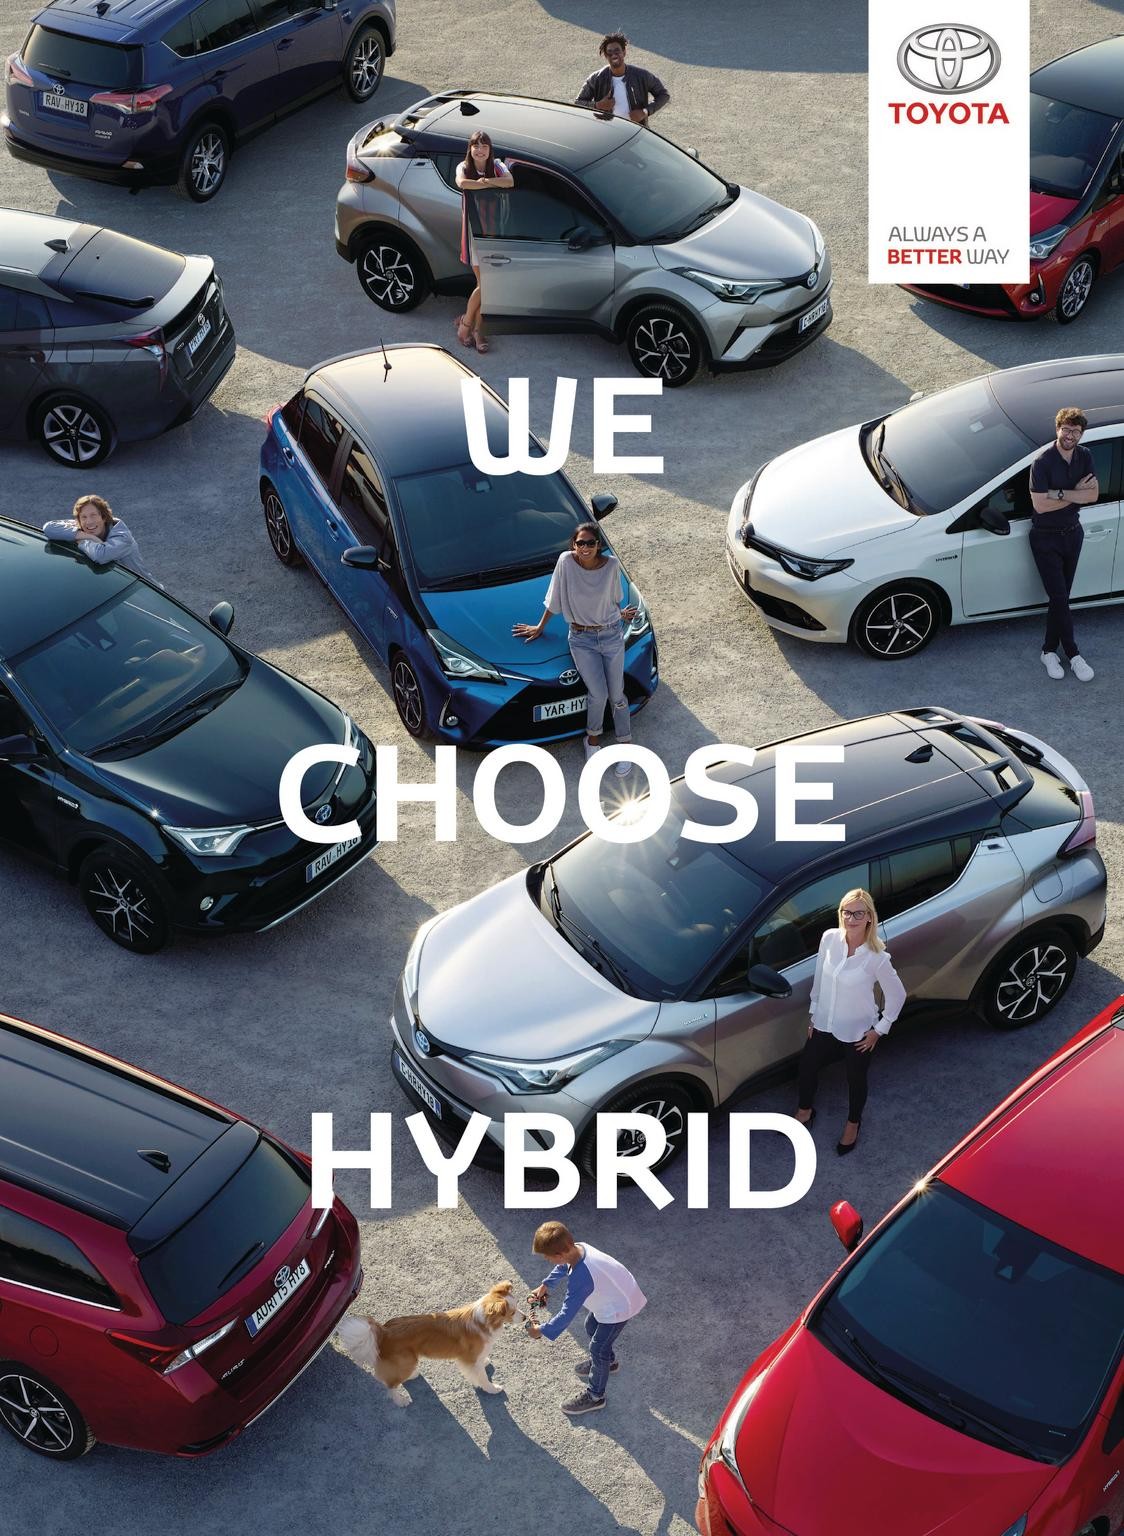 Toyota Hybrid: Not A Moment To Lose